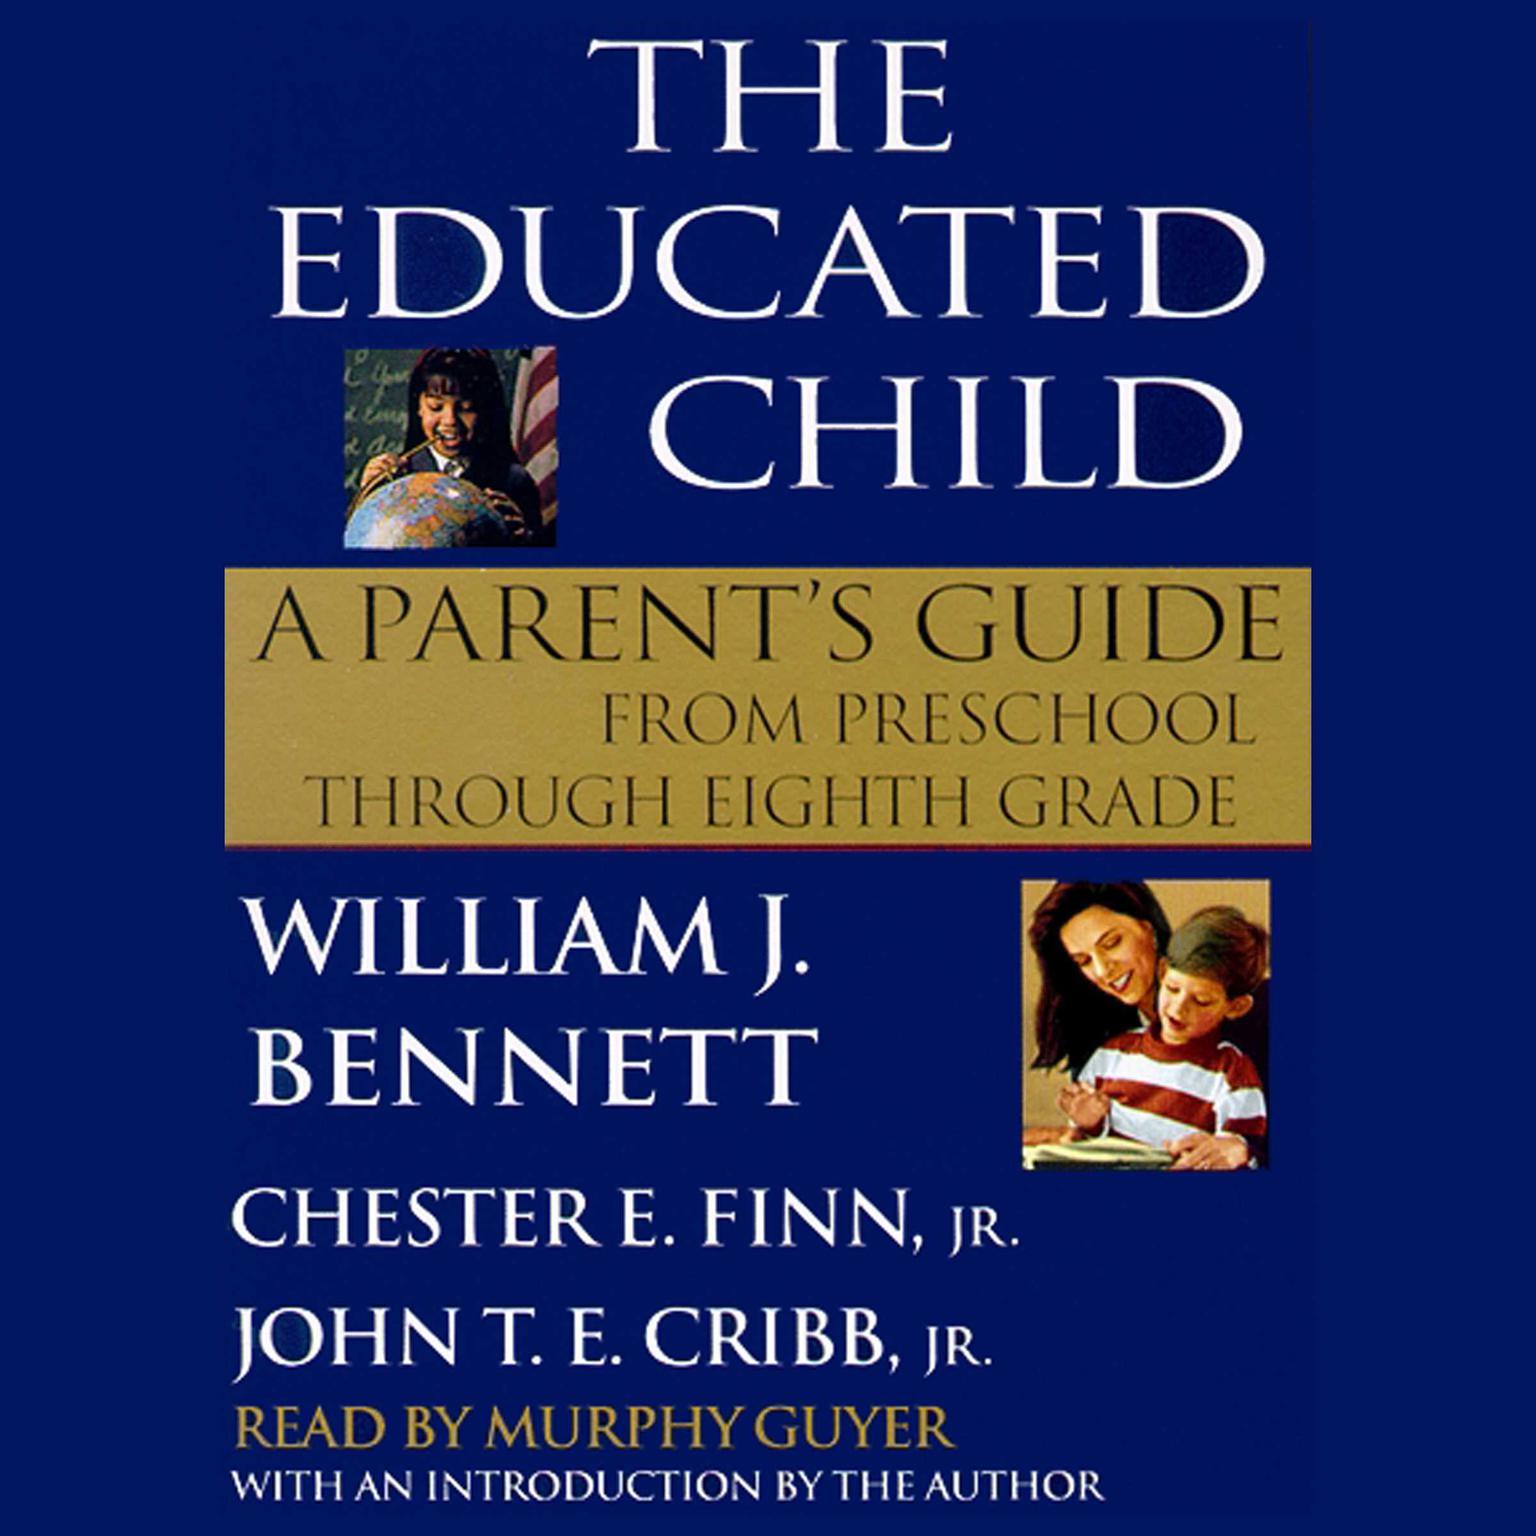 The Educated Child (Abridged): A Parent’s Guide from Preschool through Eighth Grade Audiobook, by William J. Bennett